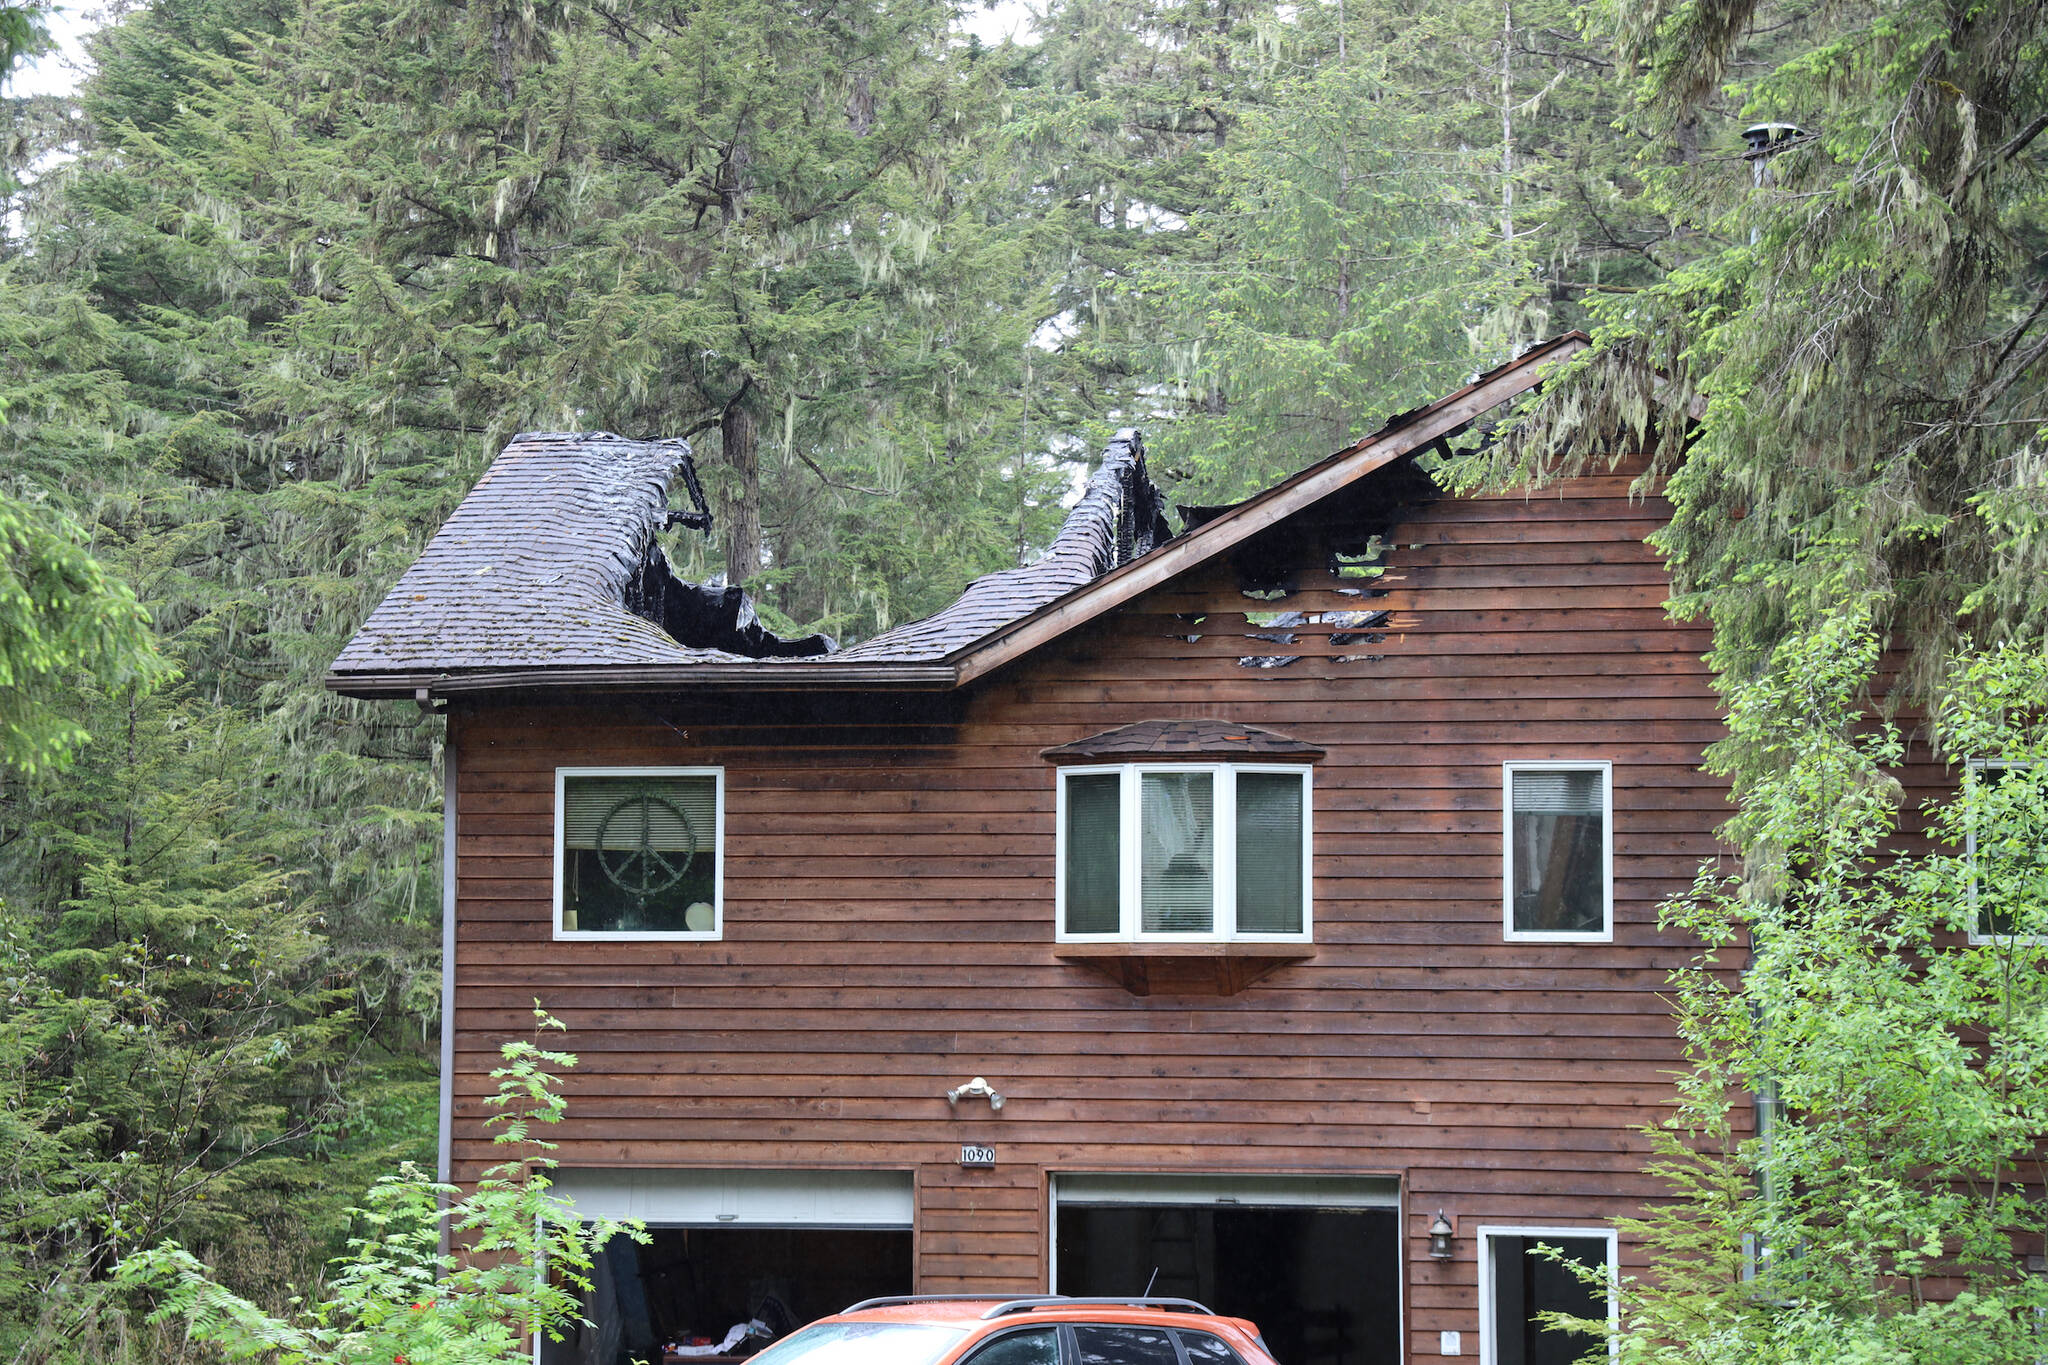 Portions of the roof of a home in the Fritz Cove area near Fox Farm Trail are caved in following a structure fire Tuesday morning. No injuries were reported. (Clarise Larson / Juneau Empire)